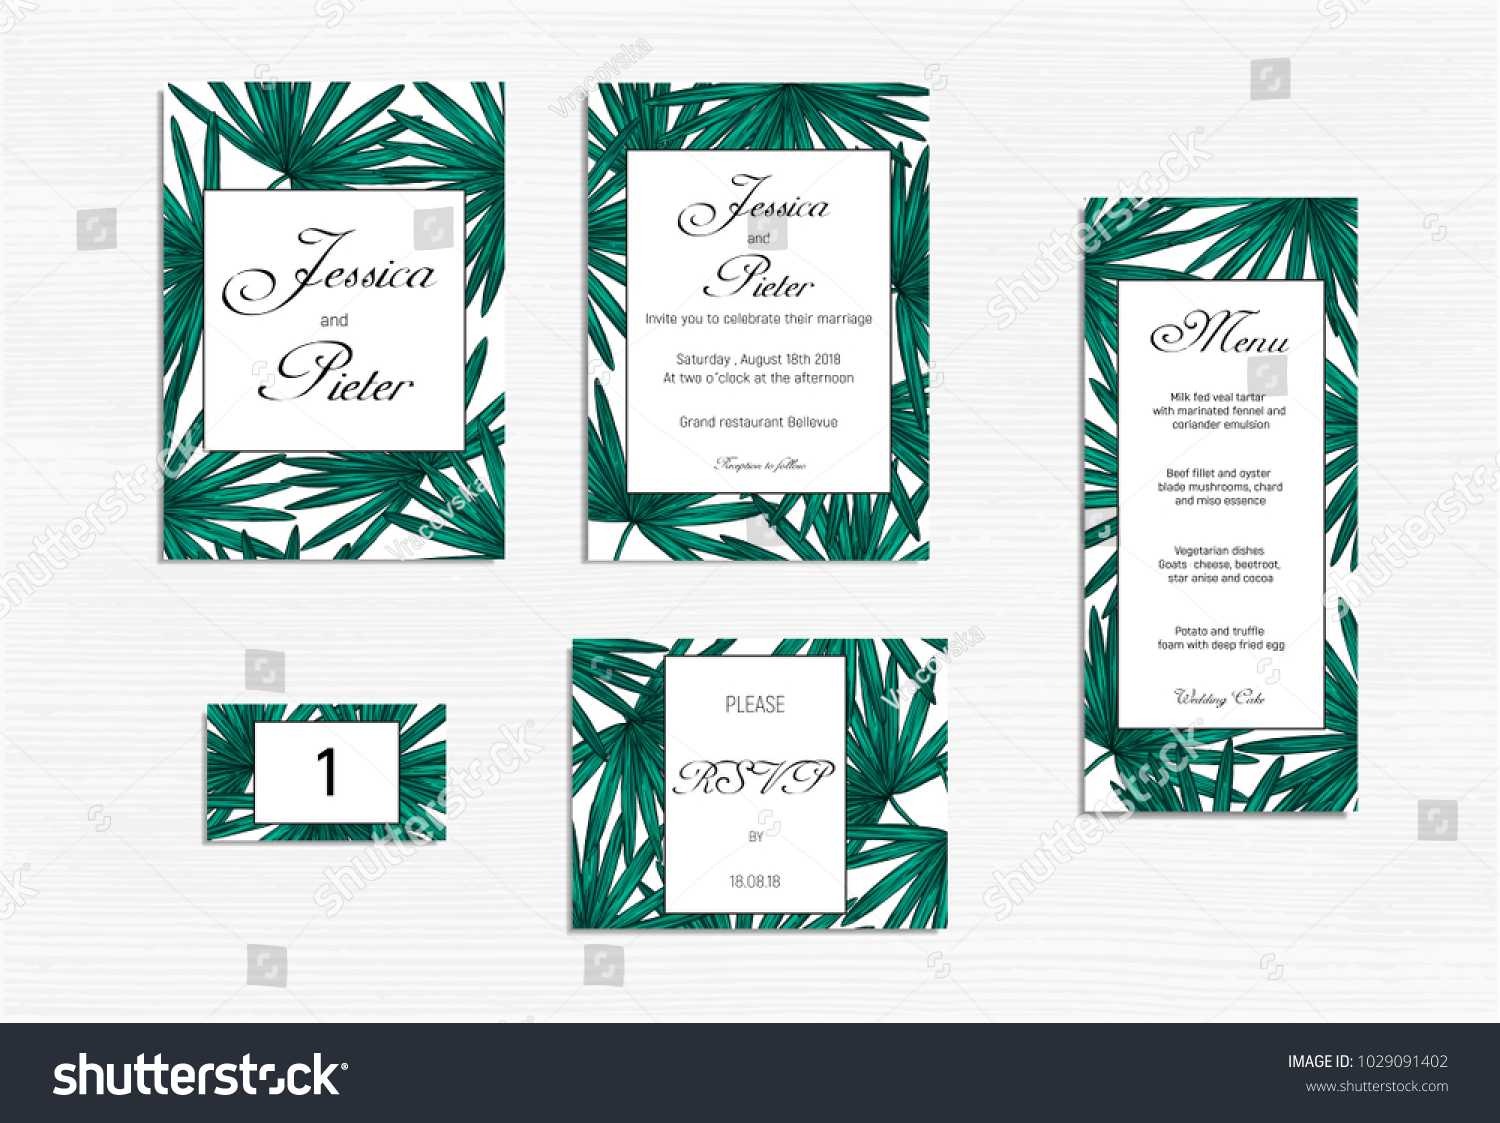 Wedding Invitations Set Mockup Tropical Design Throughout Wedding Card Size Template